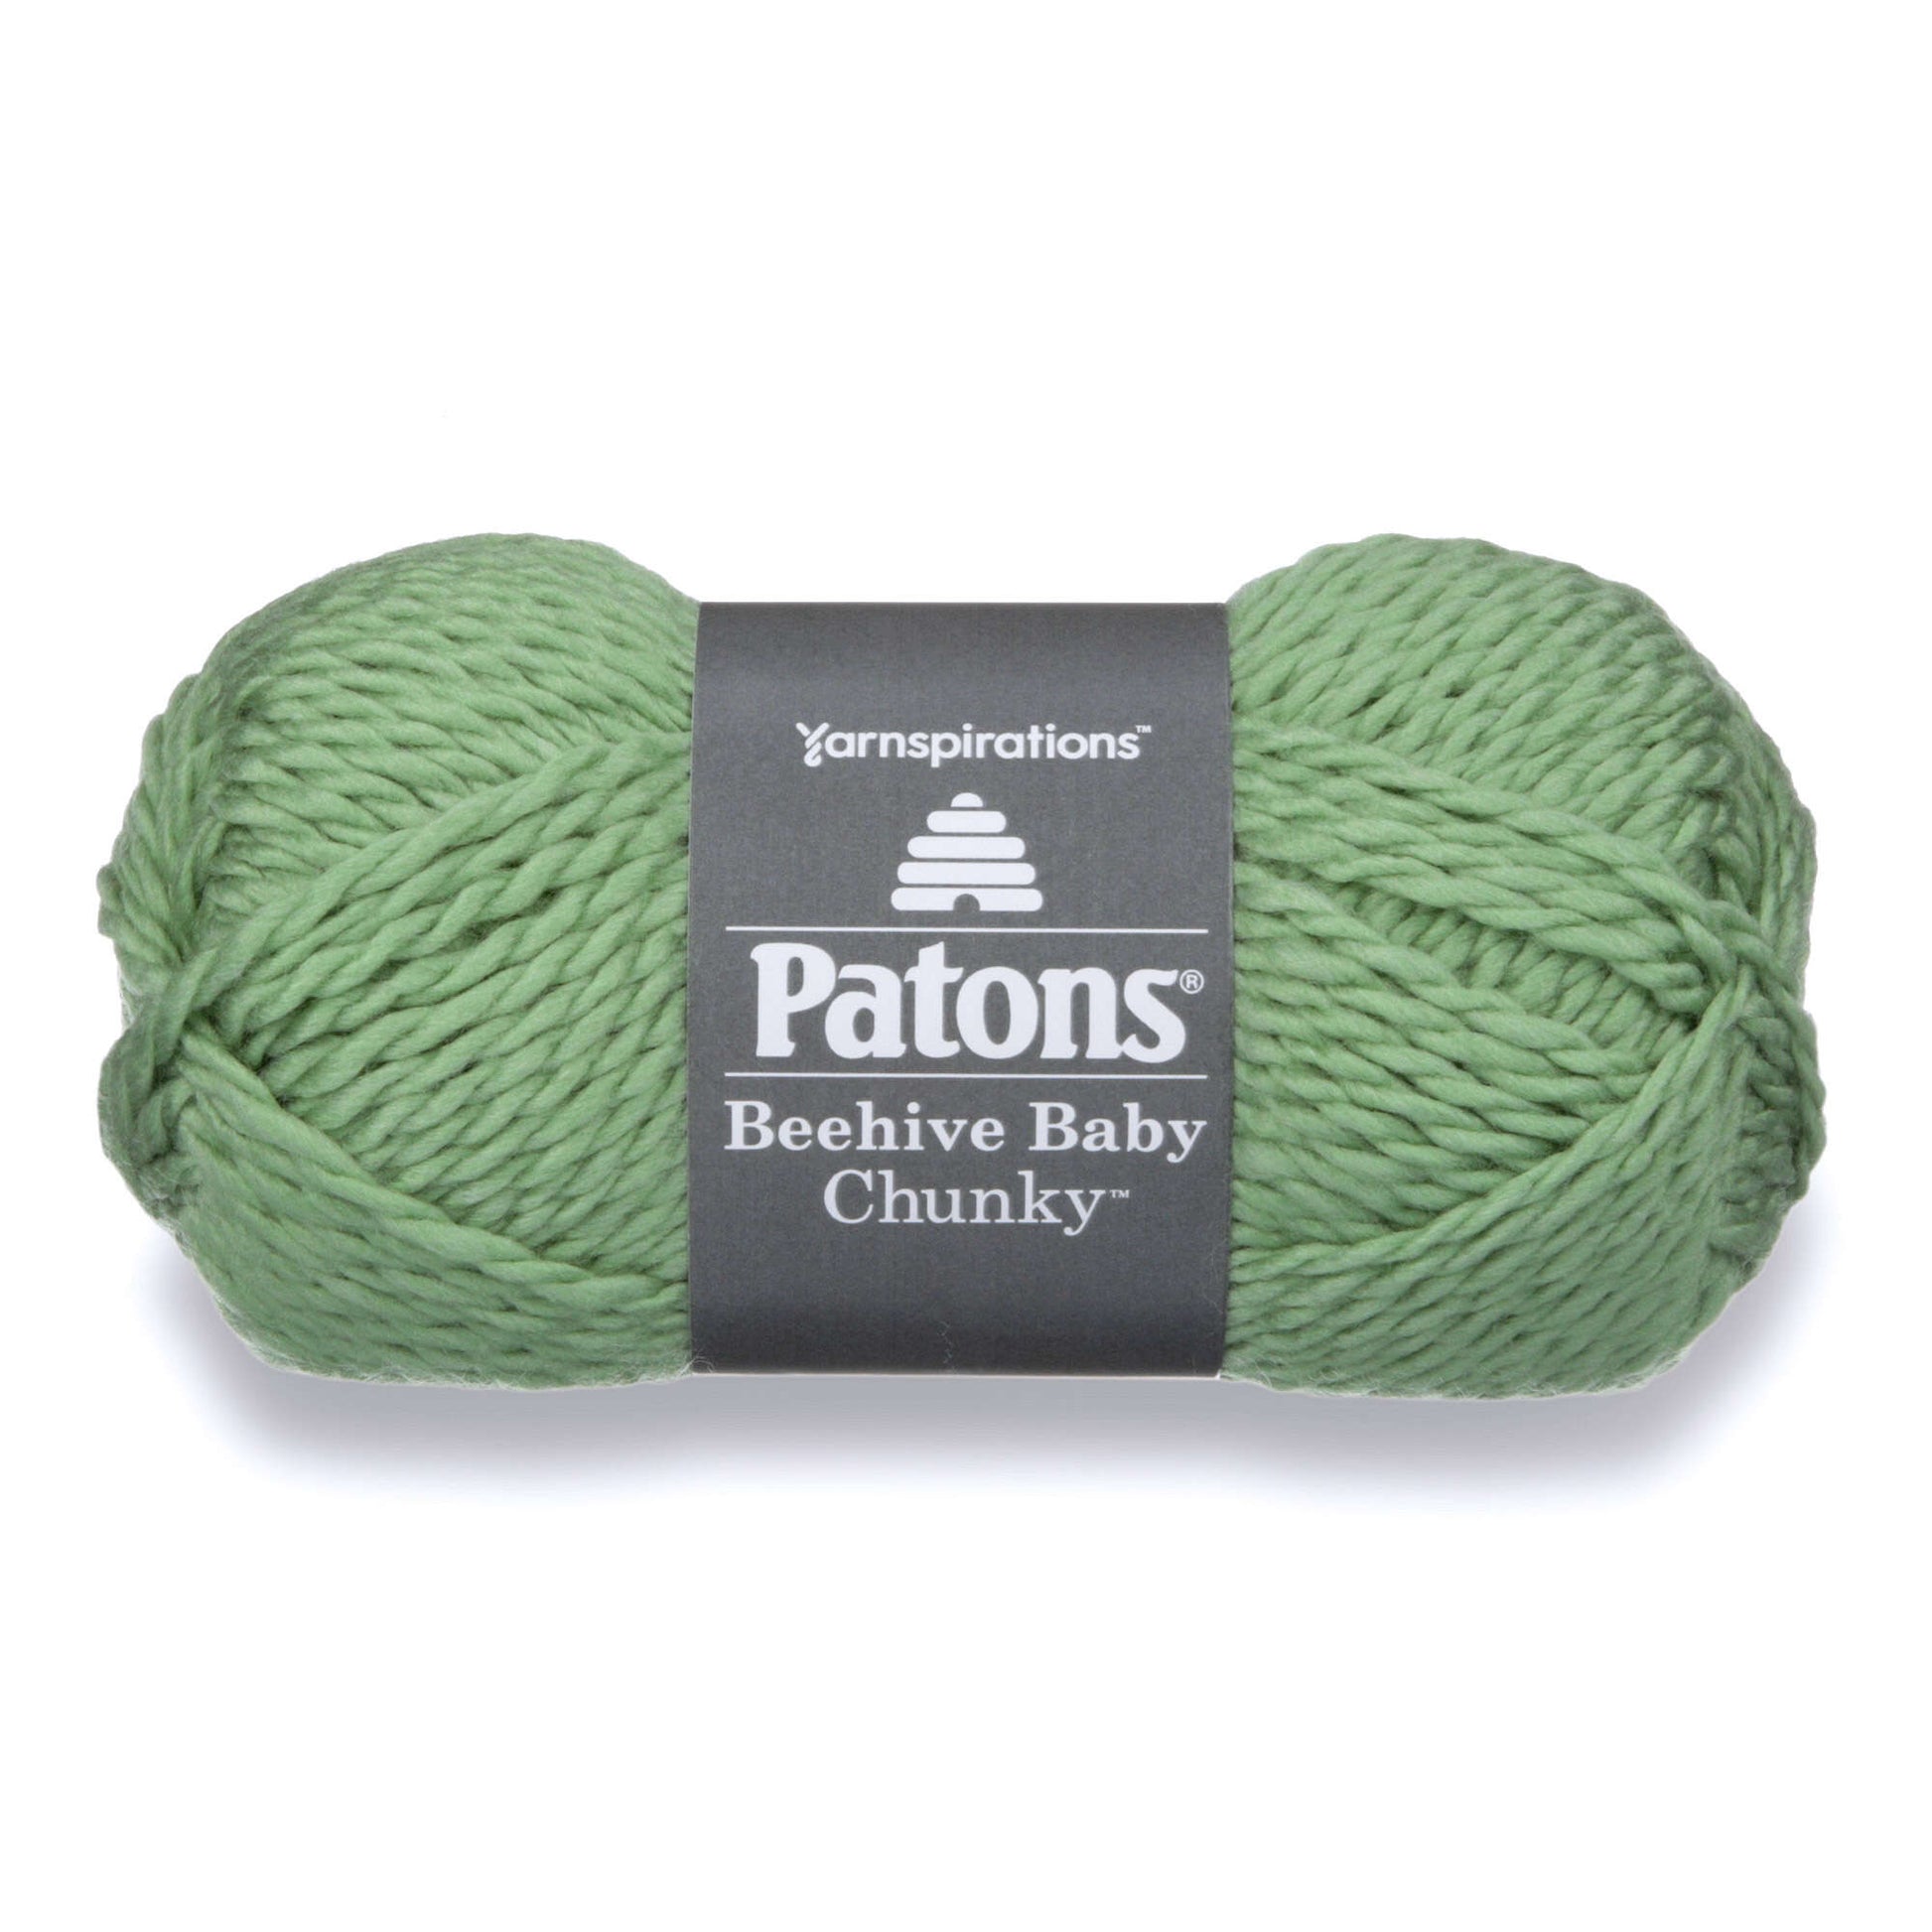 Patons Beehive Baby Chunky Yarn - Discontinued Shades Quicker Clover